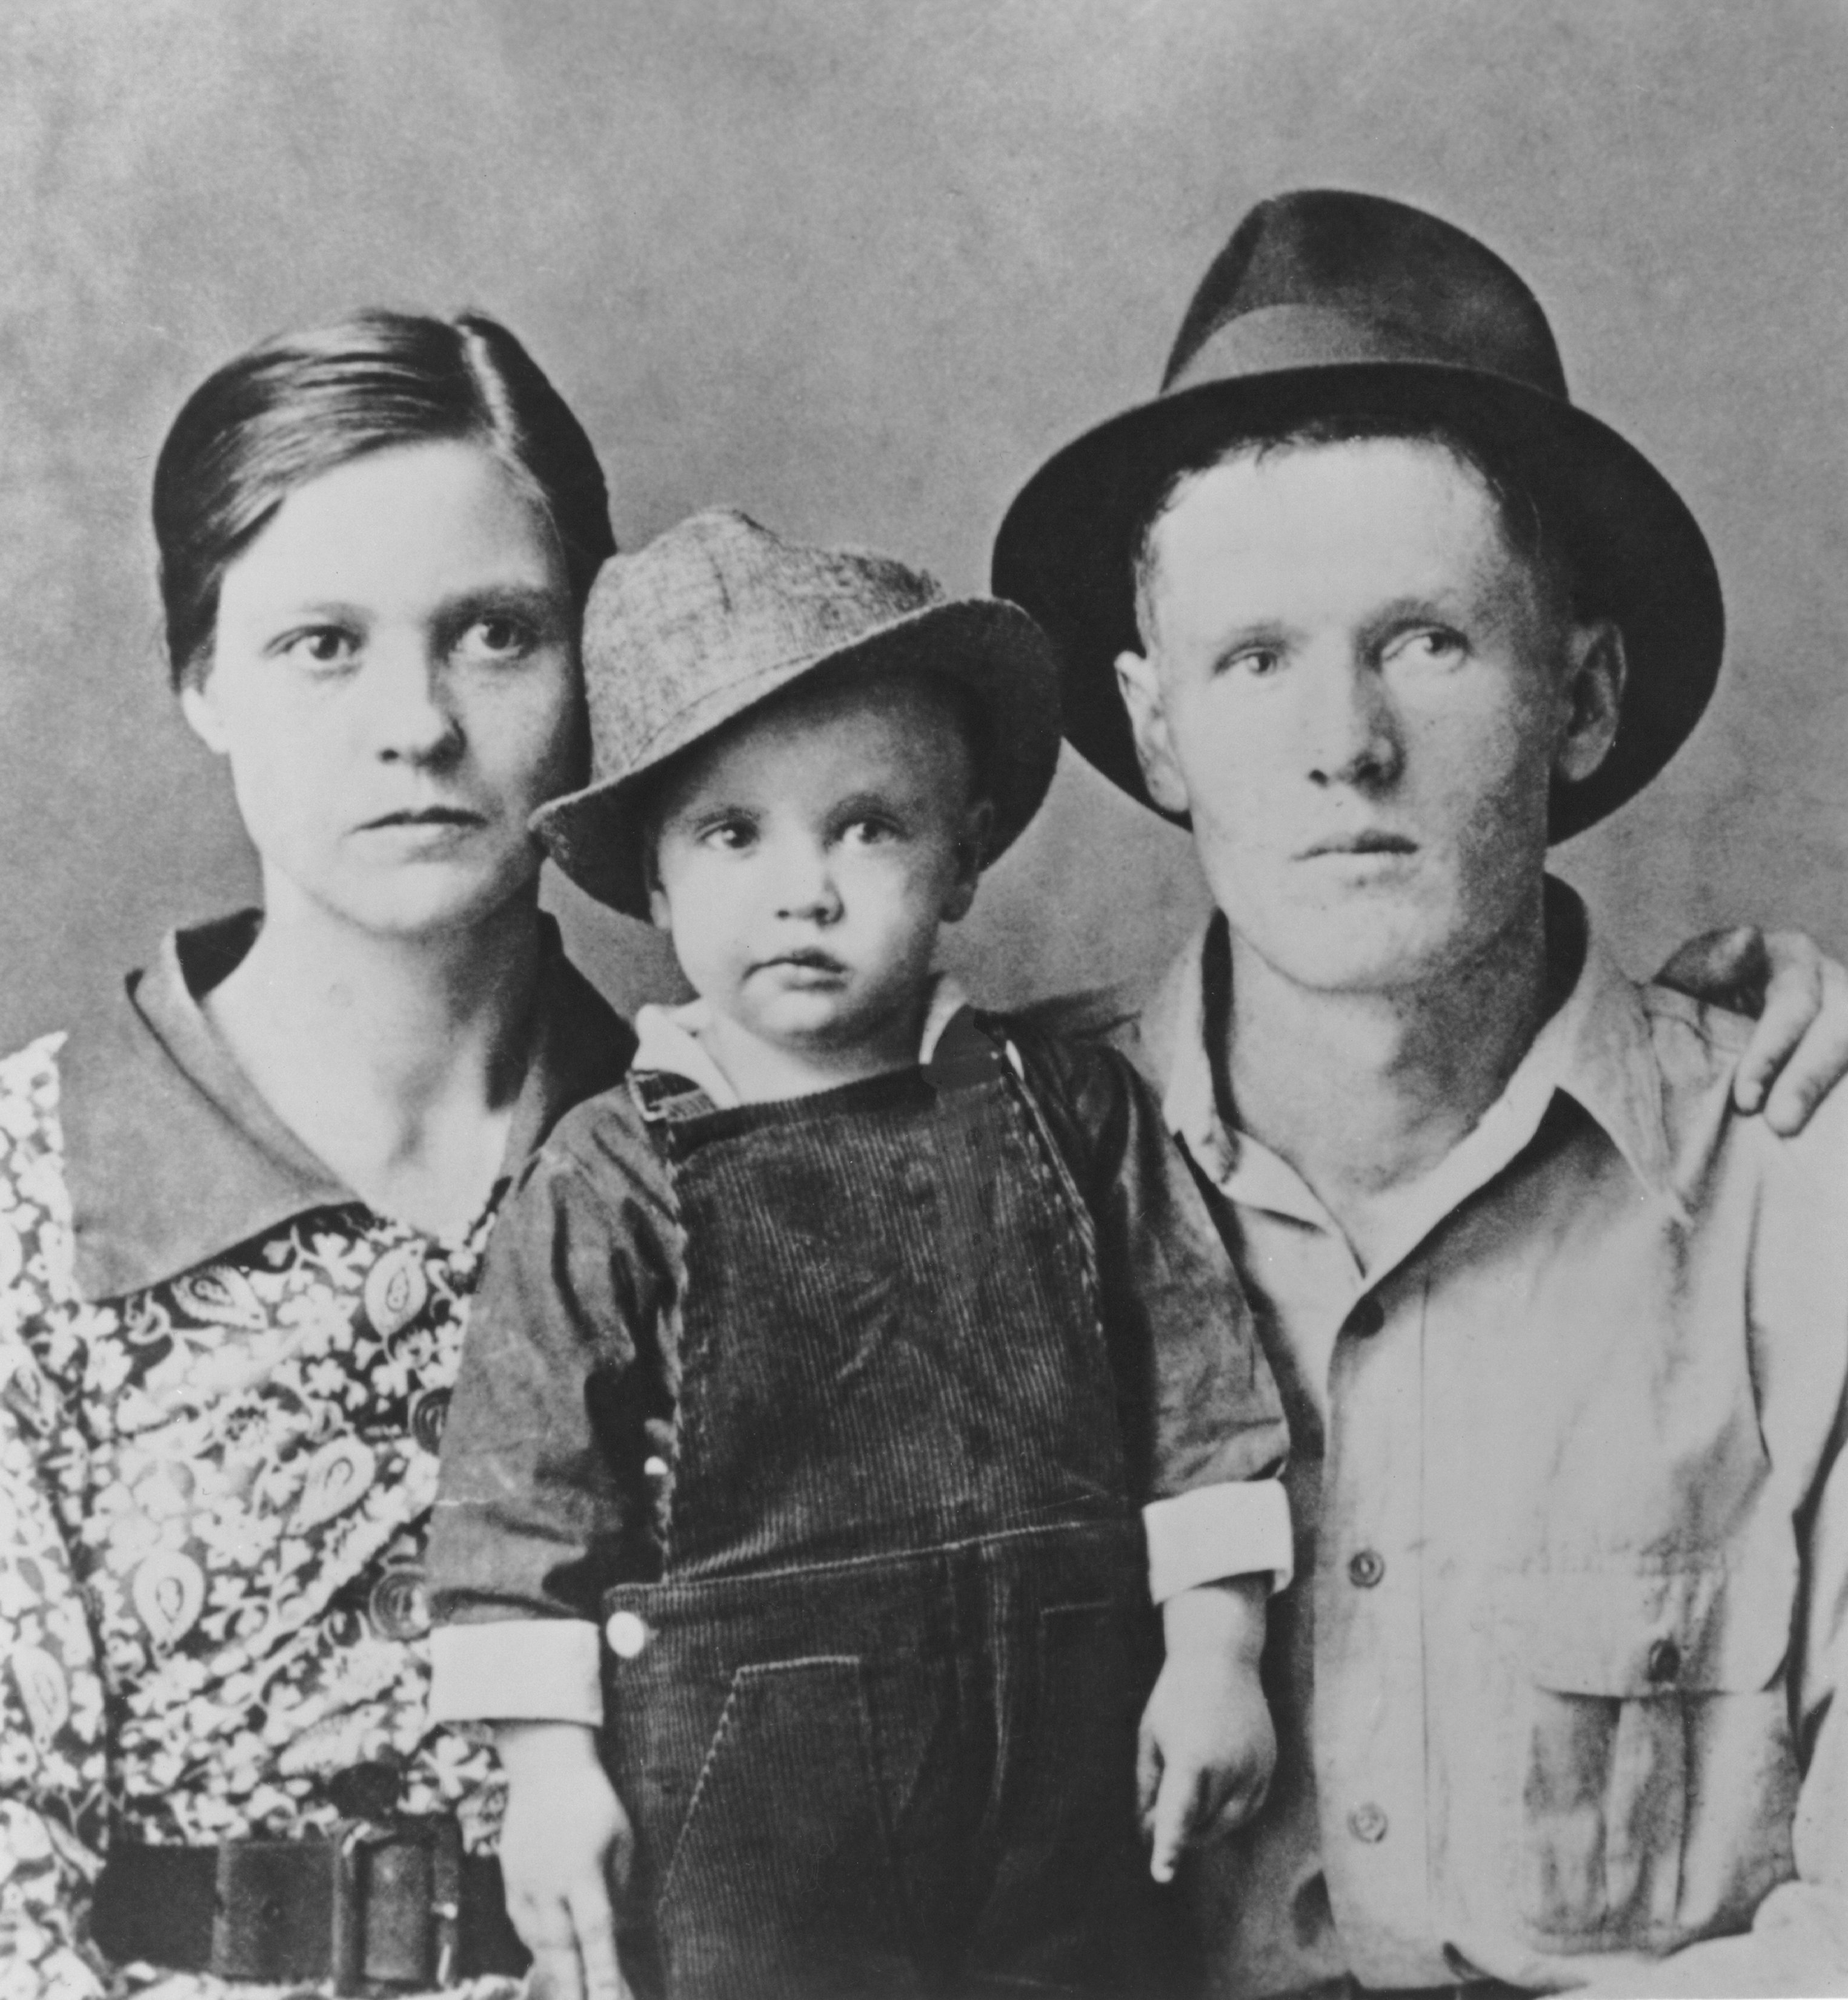 Two year old Elvis Presley poses for a family portrait with his parents Vernon Presley and Gladys Presley in 1937 in Tupelo, Mississippi. | Source: Getty Images